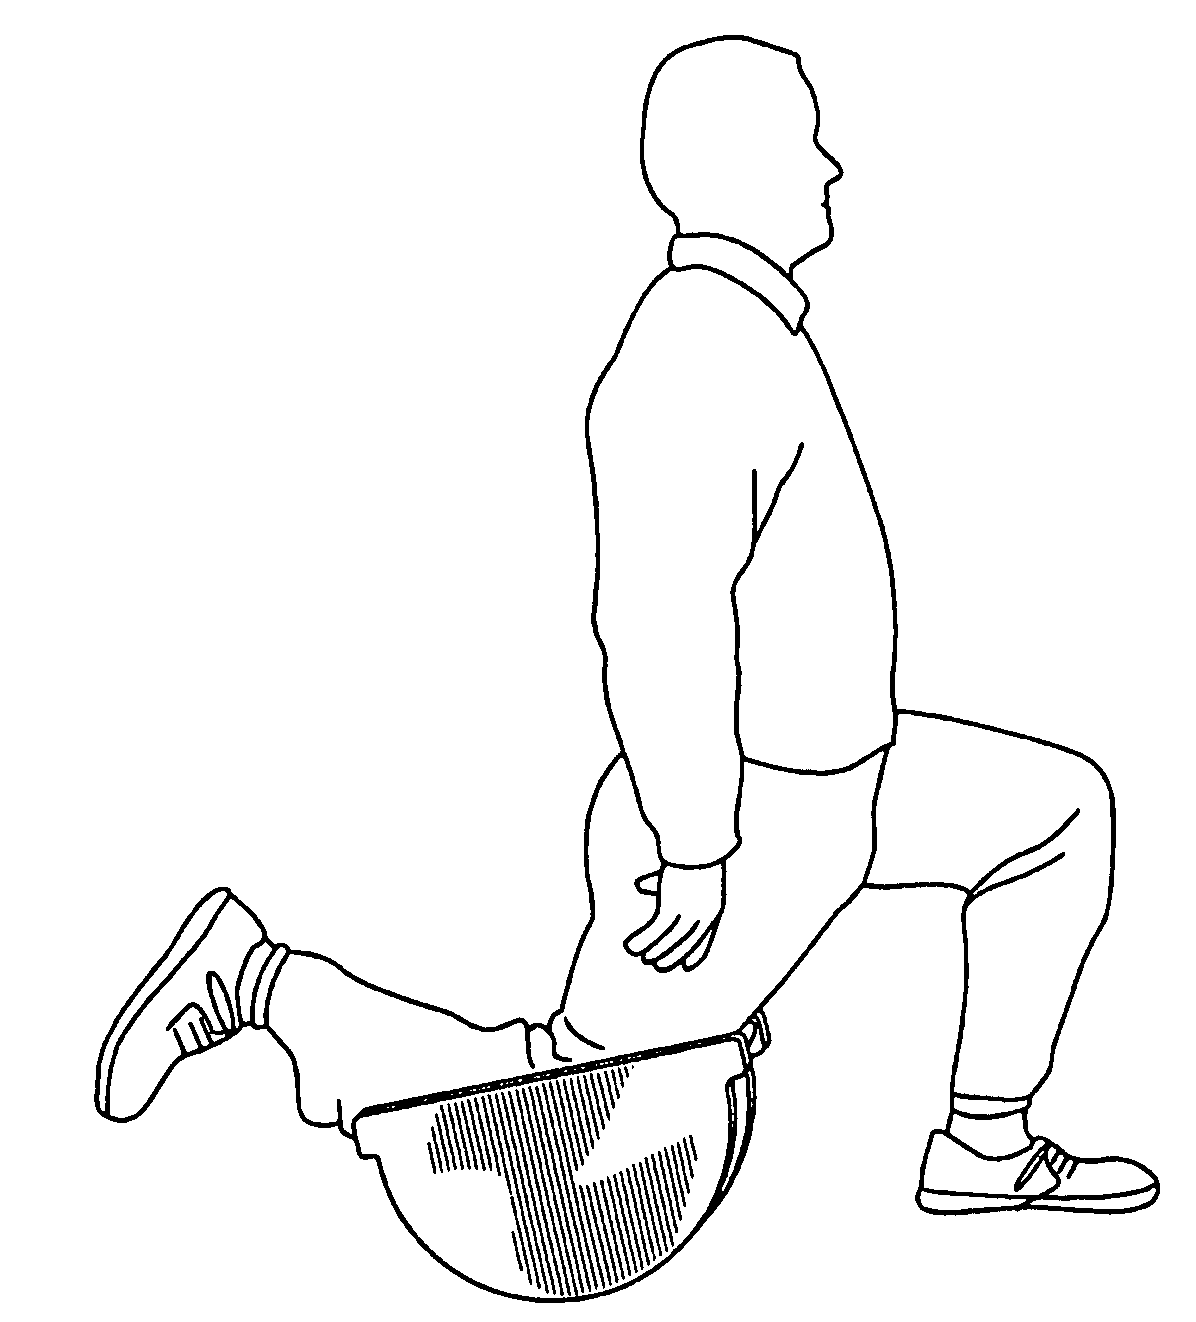 Lower extremity stretching device